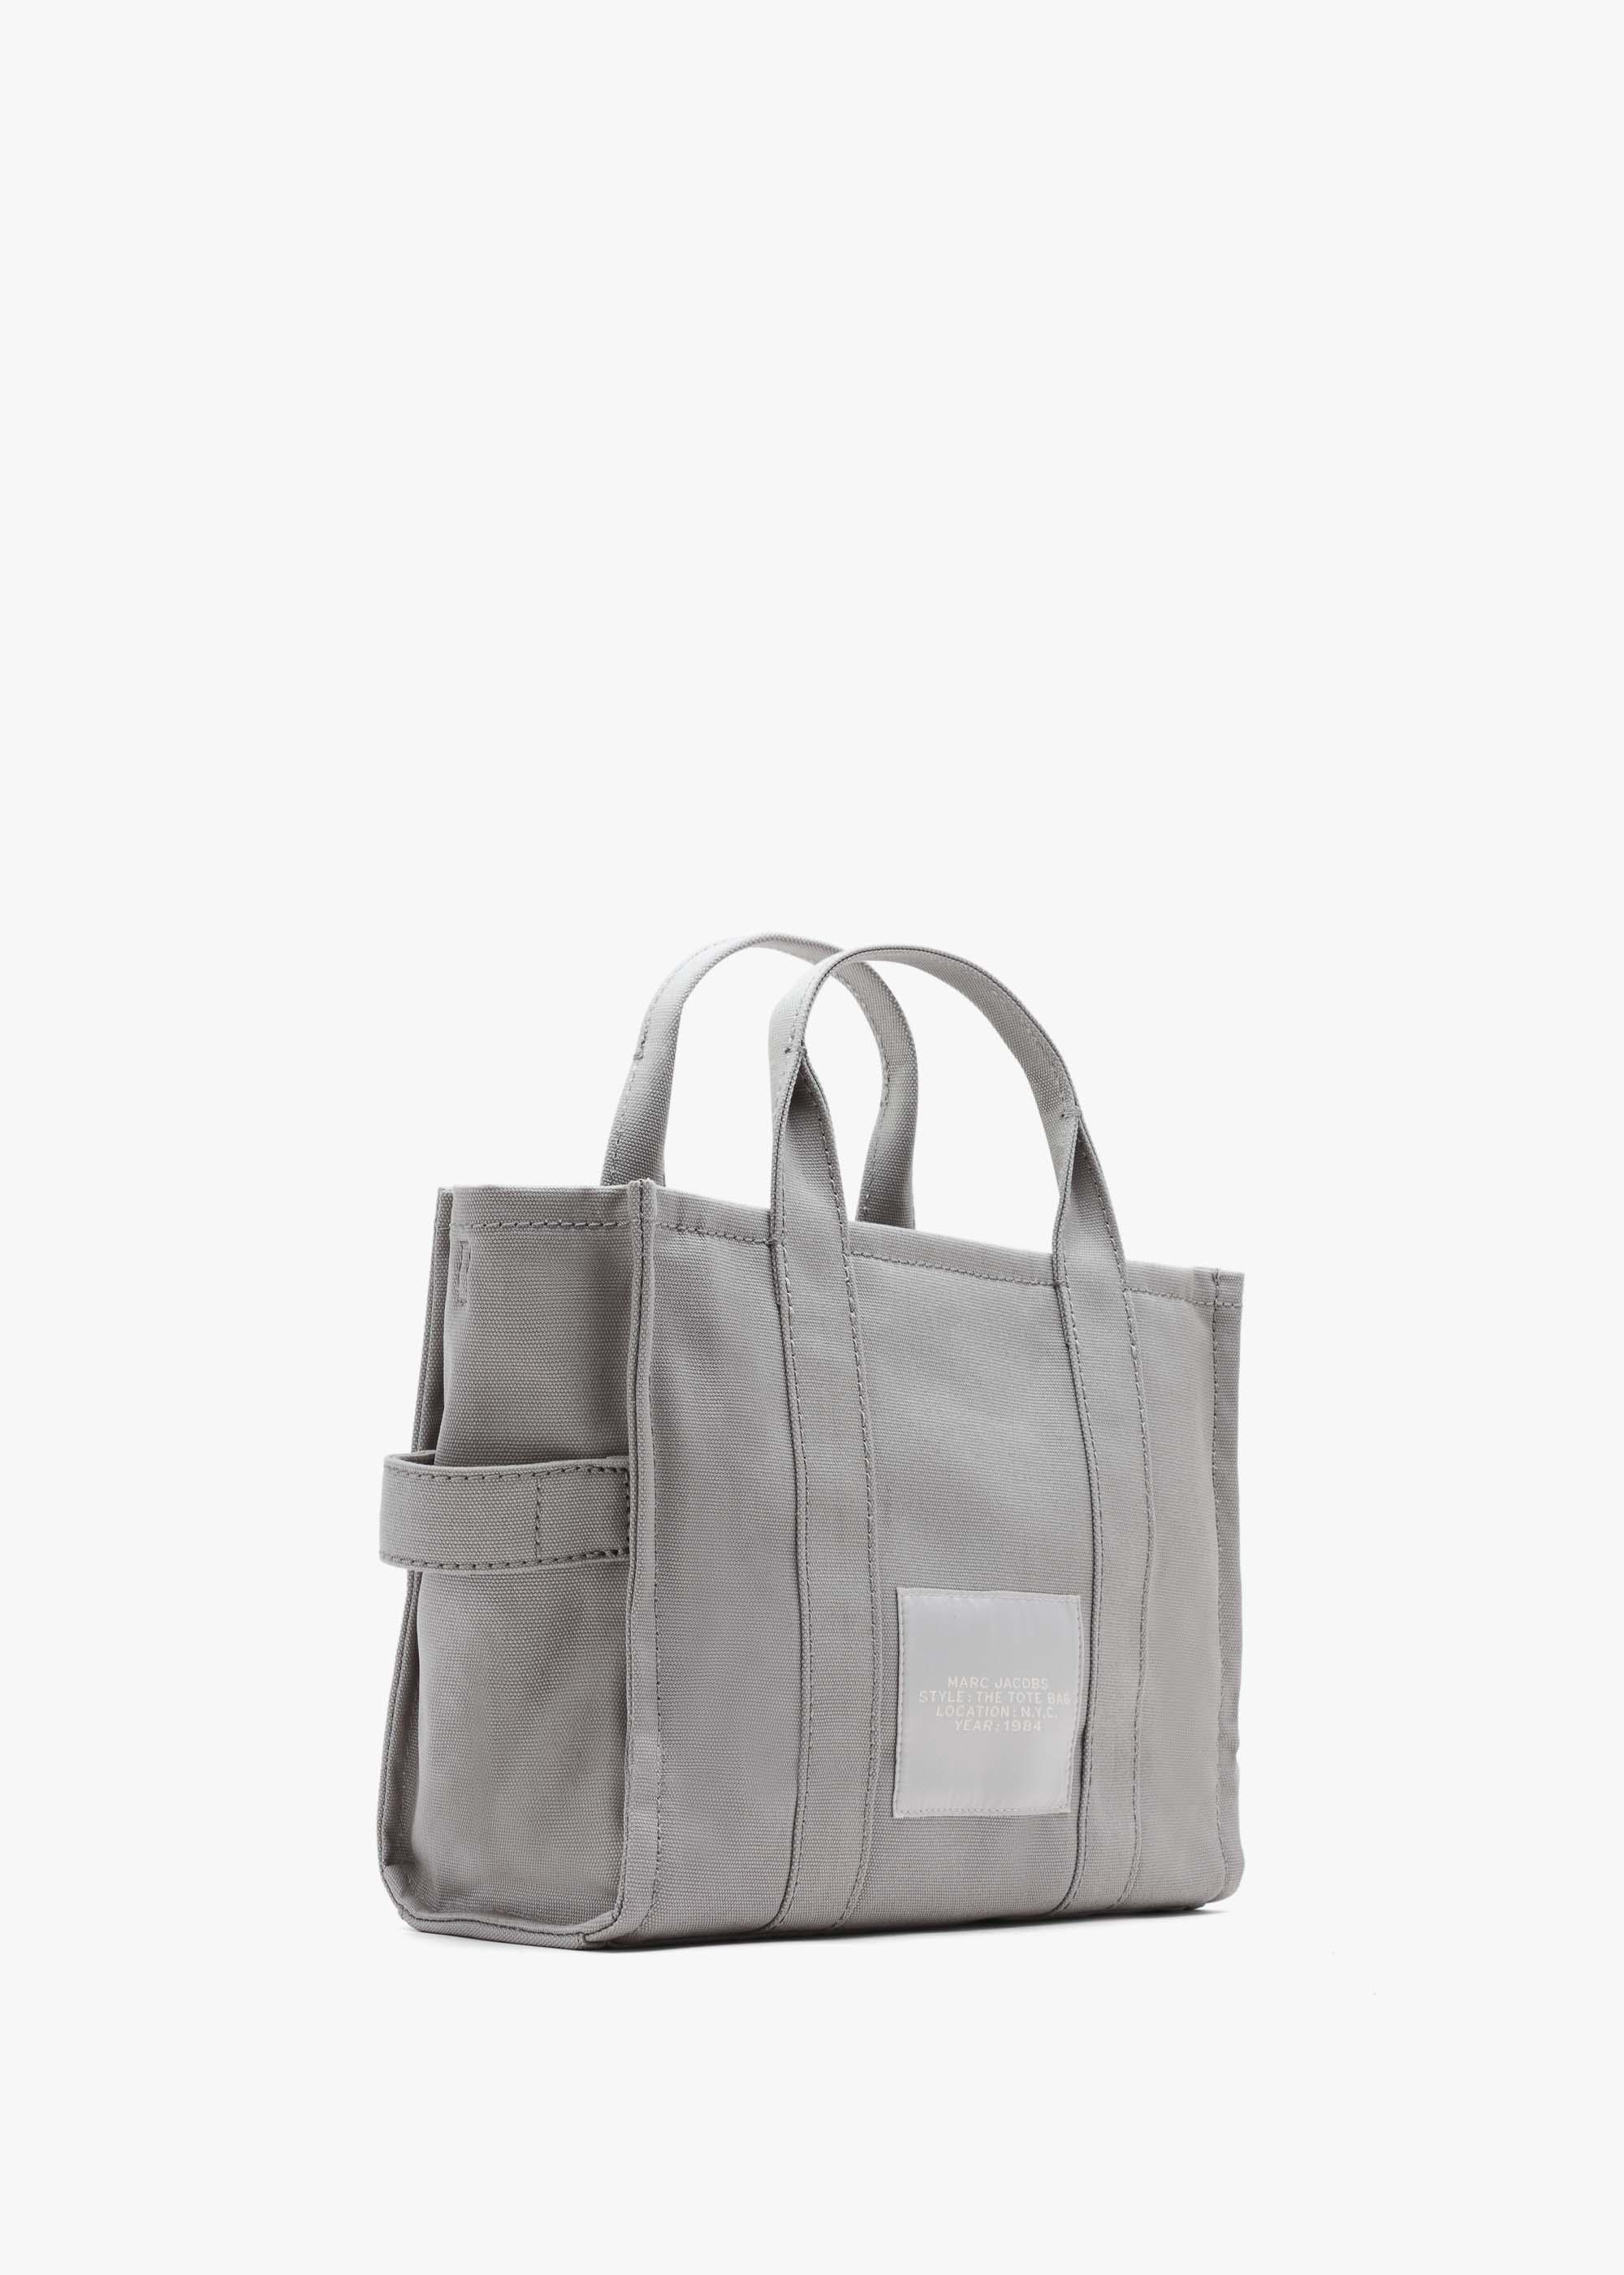 Marc Jacobs The Medium Wolf Grey Canvas Tote Bag in Gray | Lyst